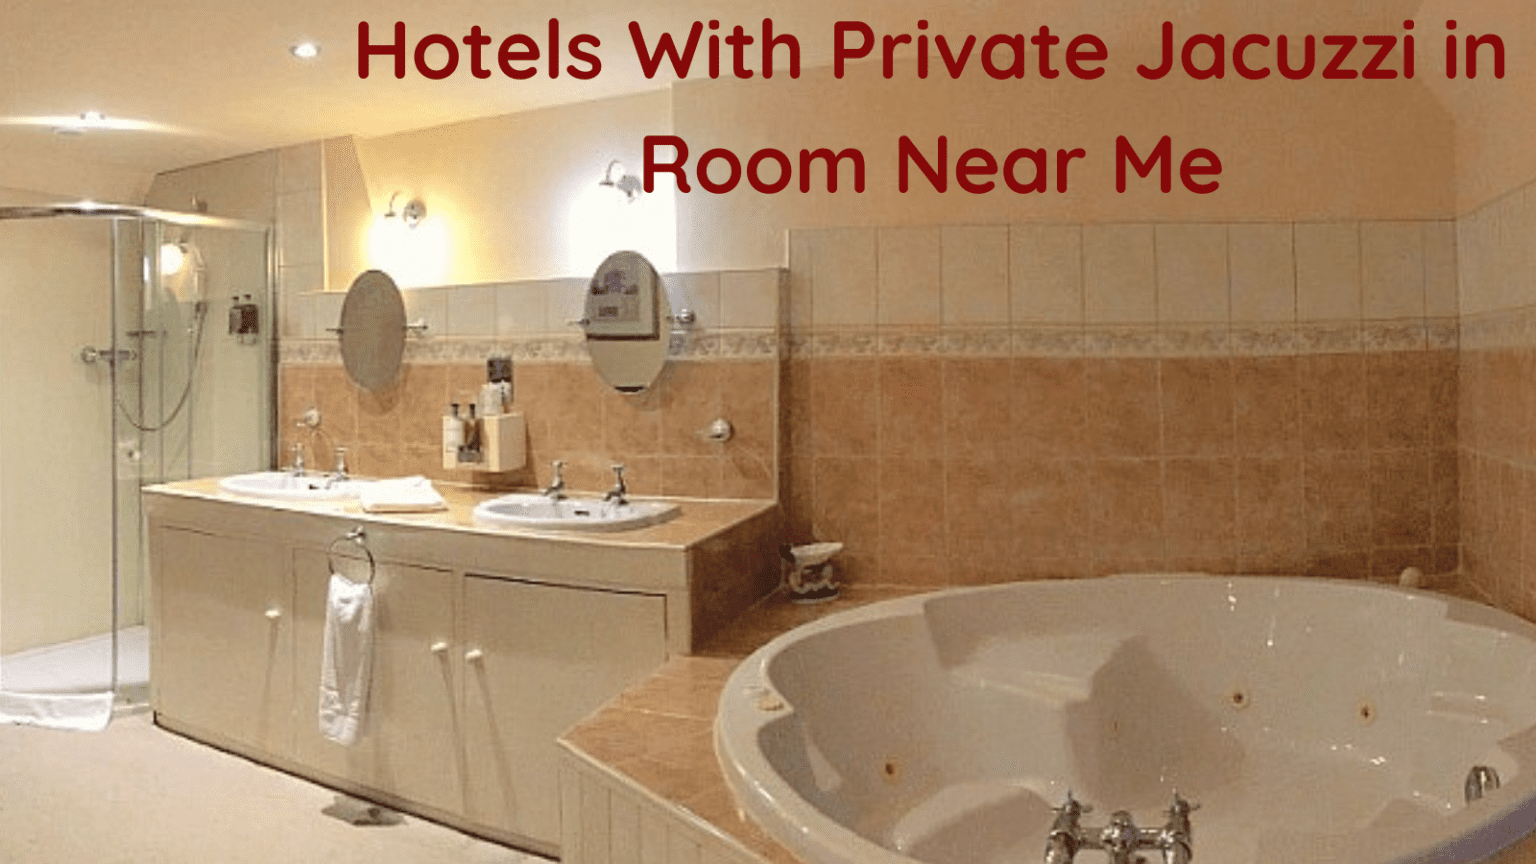 Hotels With Private Jacuzzi in Room Near Me [80% Off]